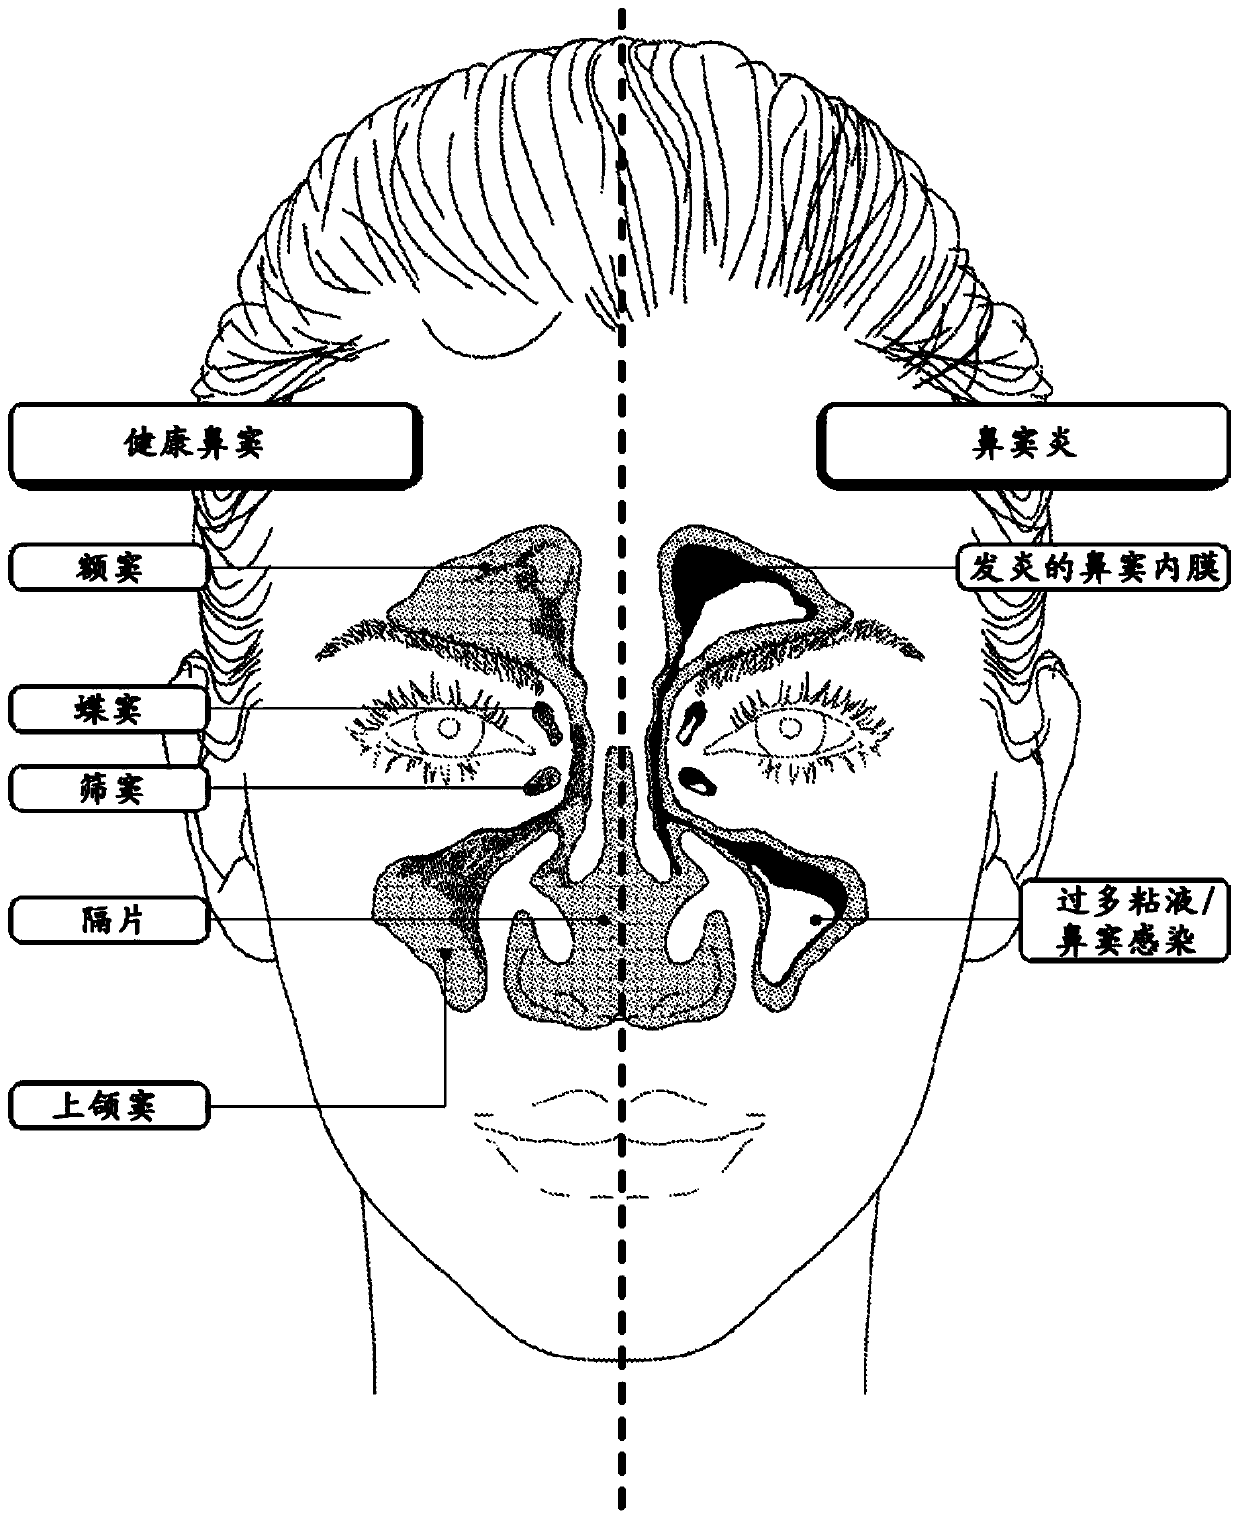 Devices and methods for diagnosis of sinusitis